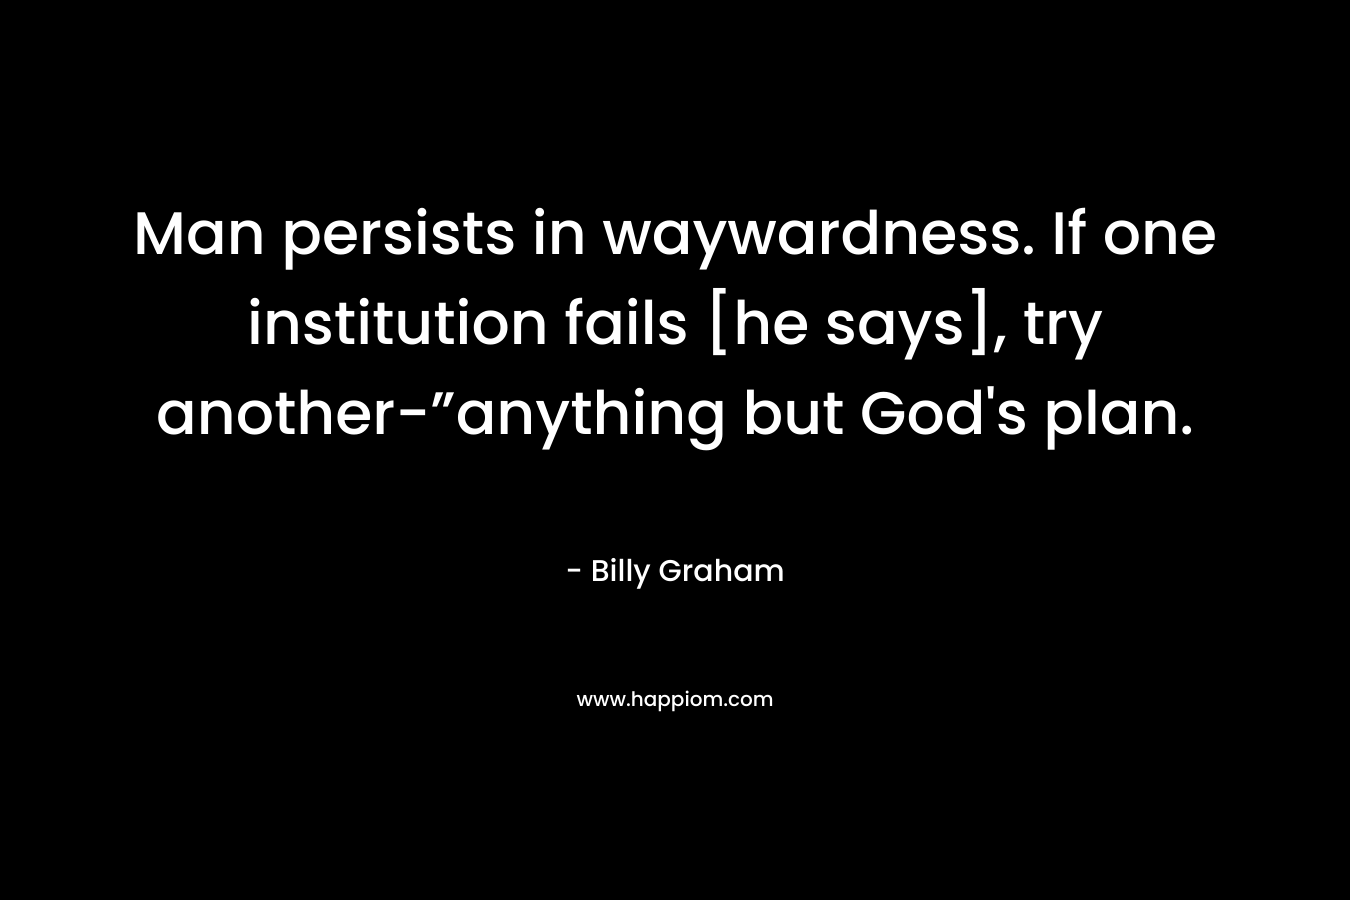 Man persists in waywardness. If one institution fails [he says], try another-”anything but God’s plan. – Billy Graham